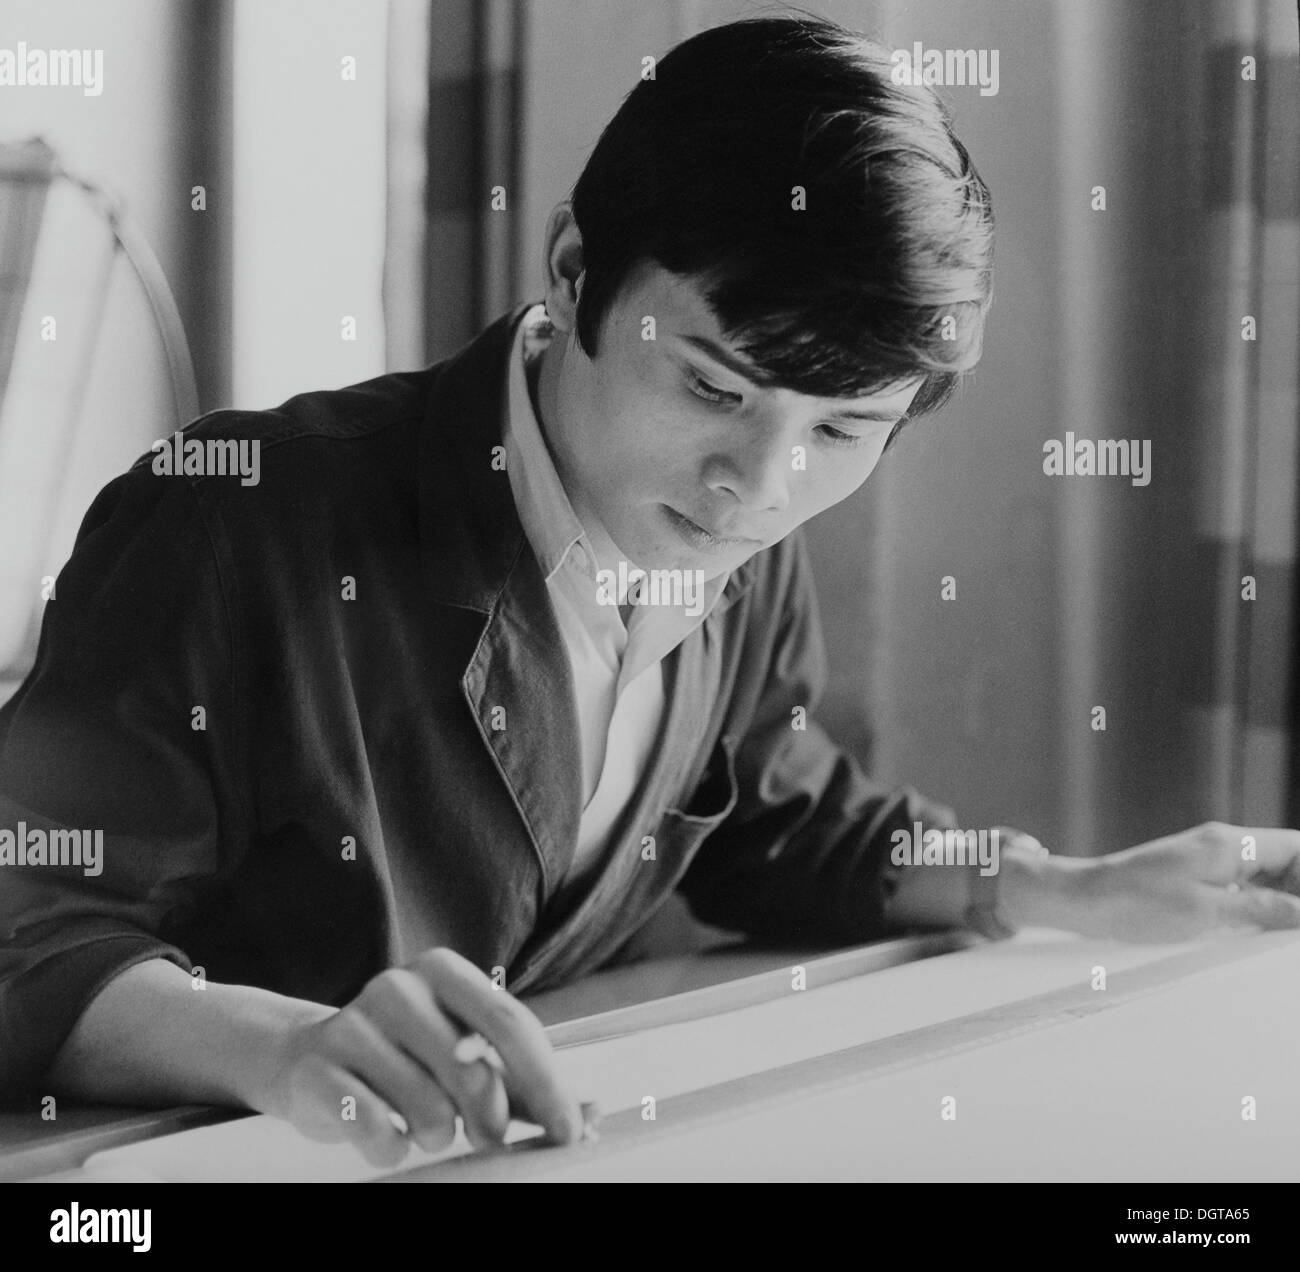 Vietnamese apprentice in a printing plant, circa 1975, Leipzig, GDR, East Germany, Europe Stock Photo